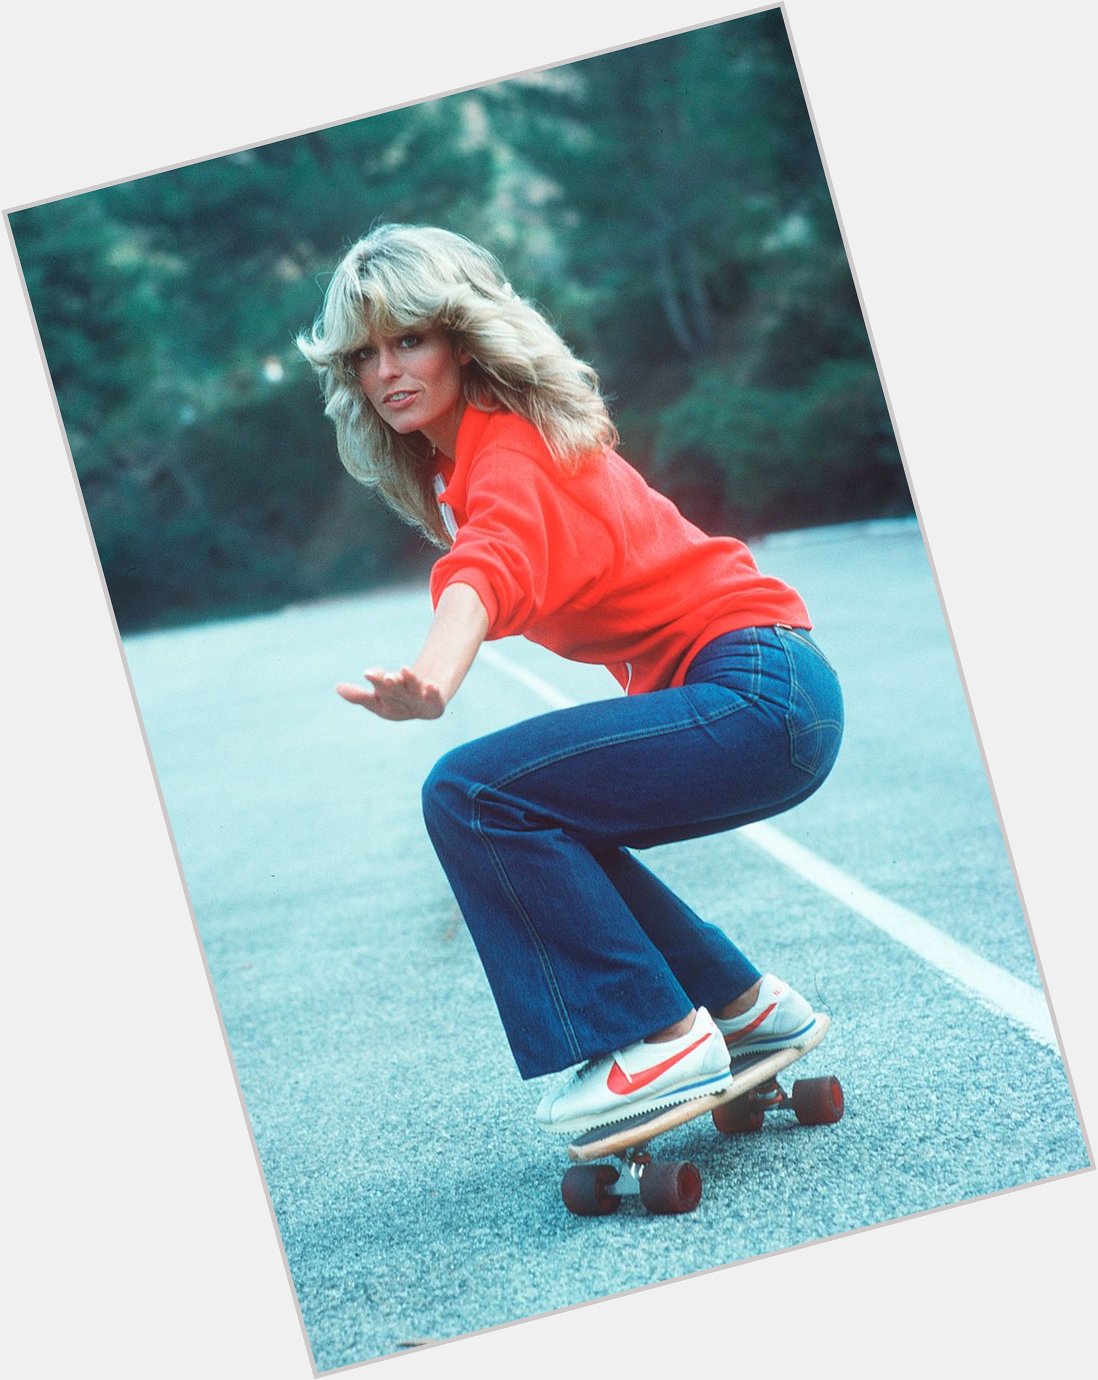 Remembering FARRAH FAWCETT who would of been 74 today, Happy Birthday 